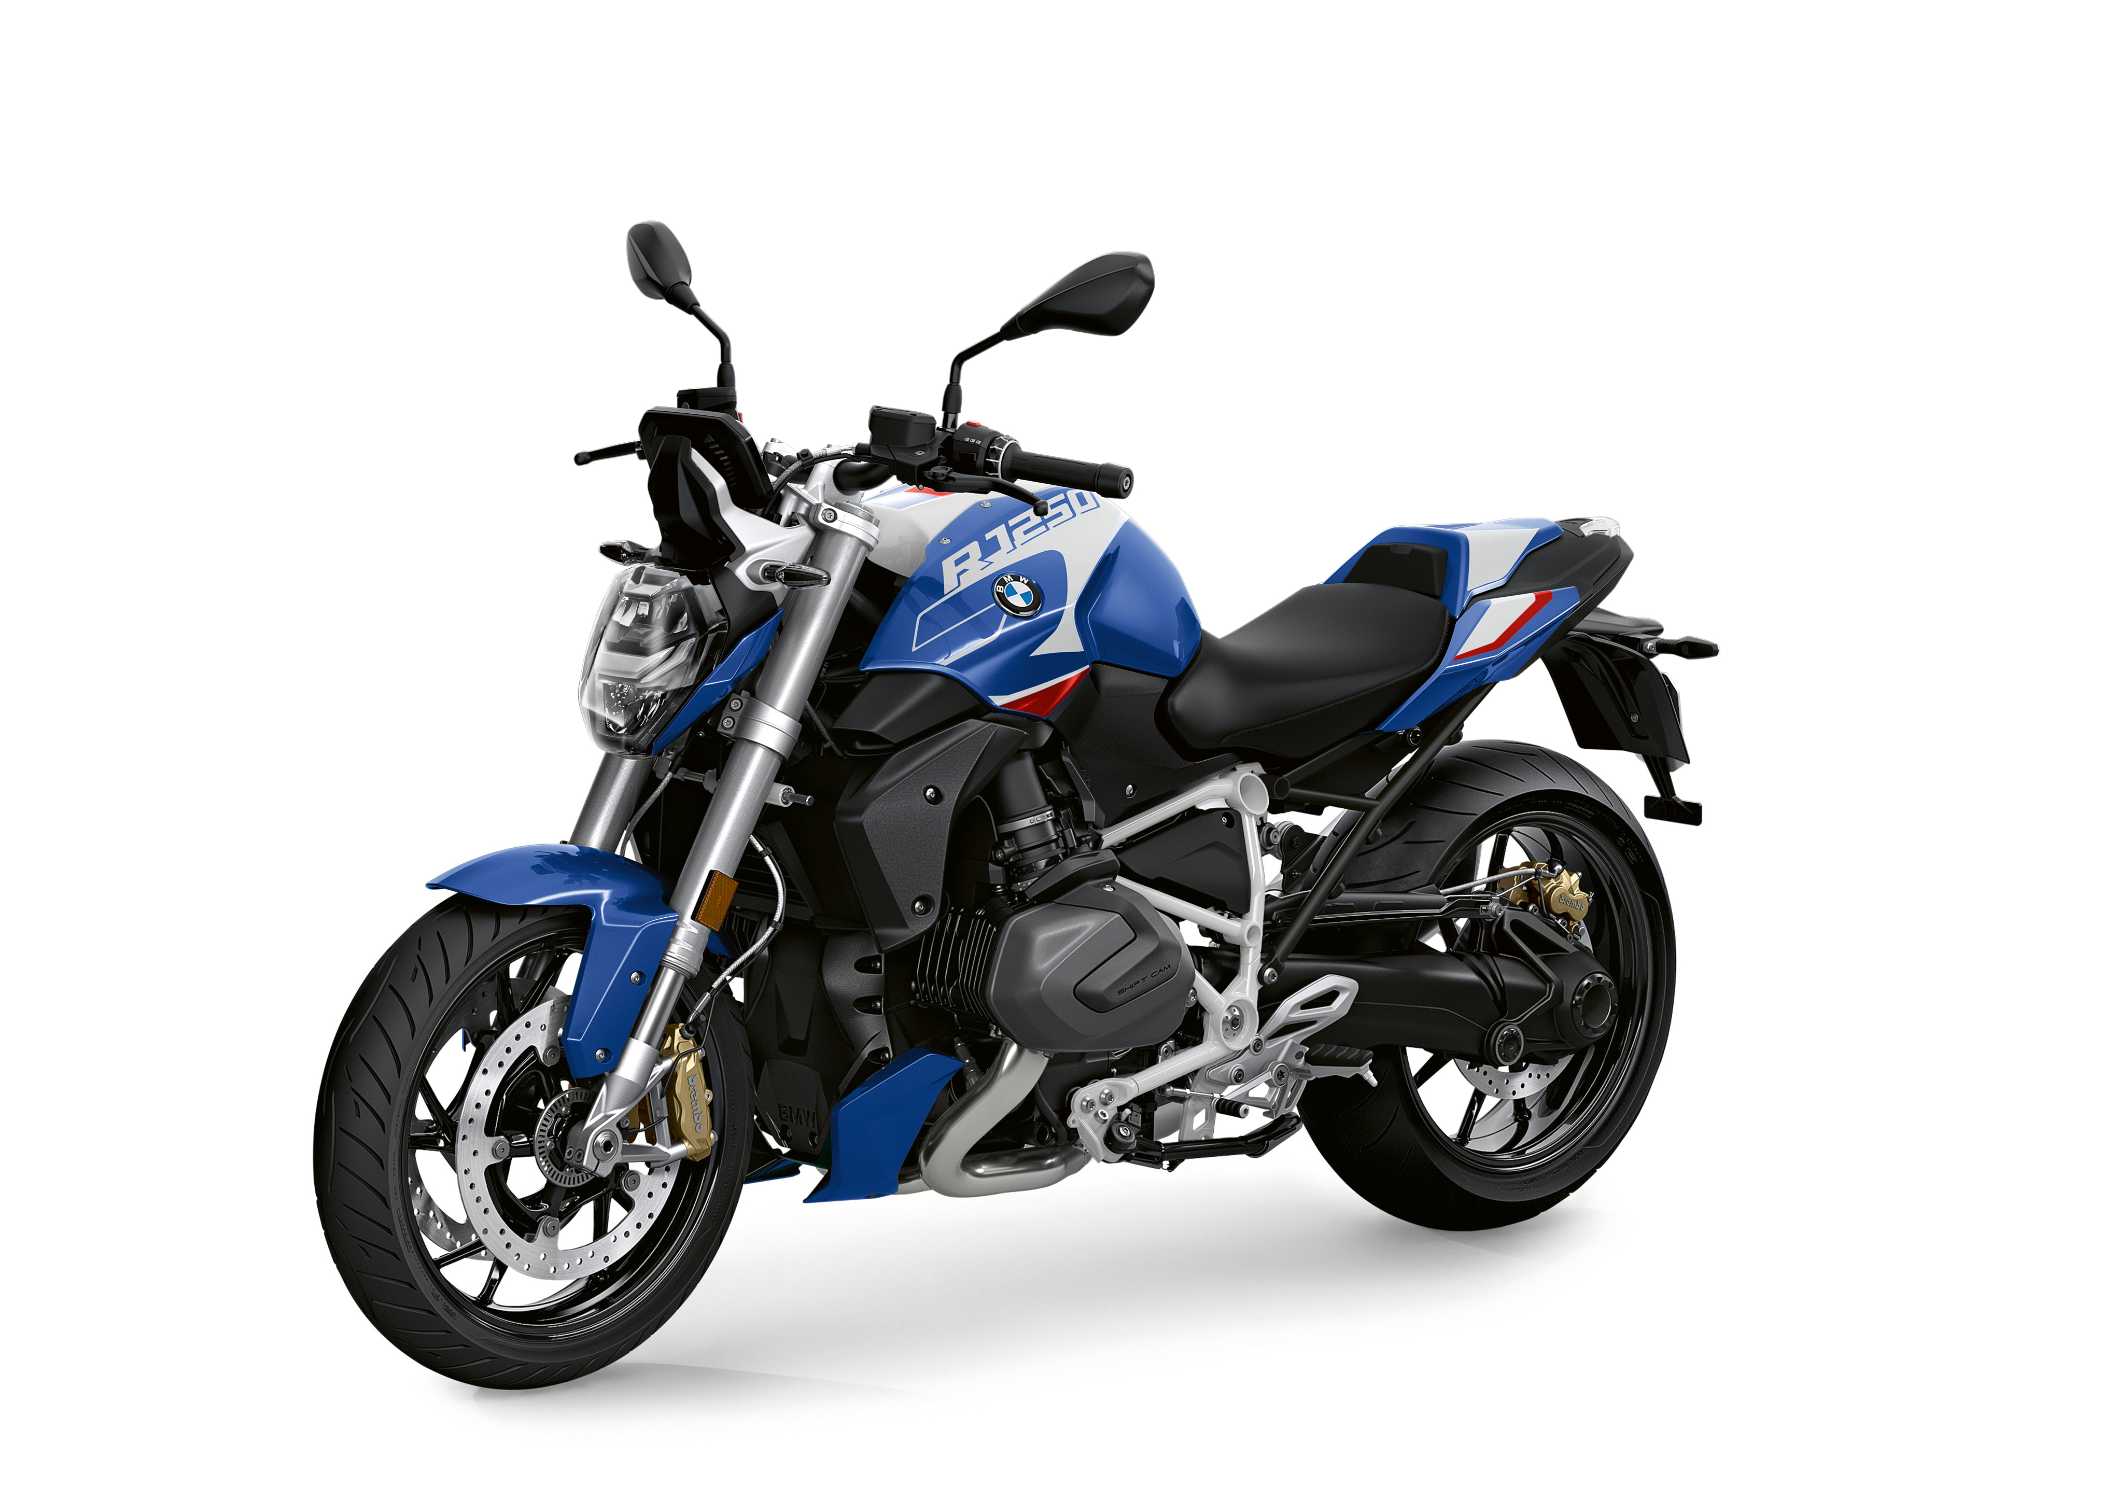 The new BMW R 1250 R Roadster.